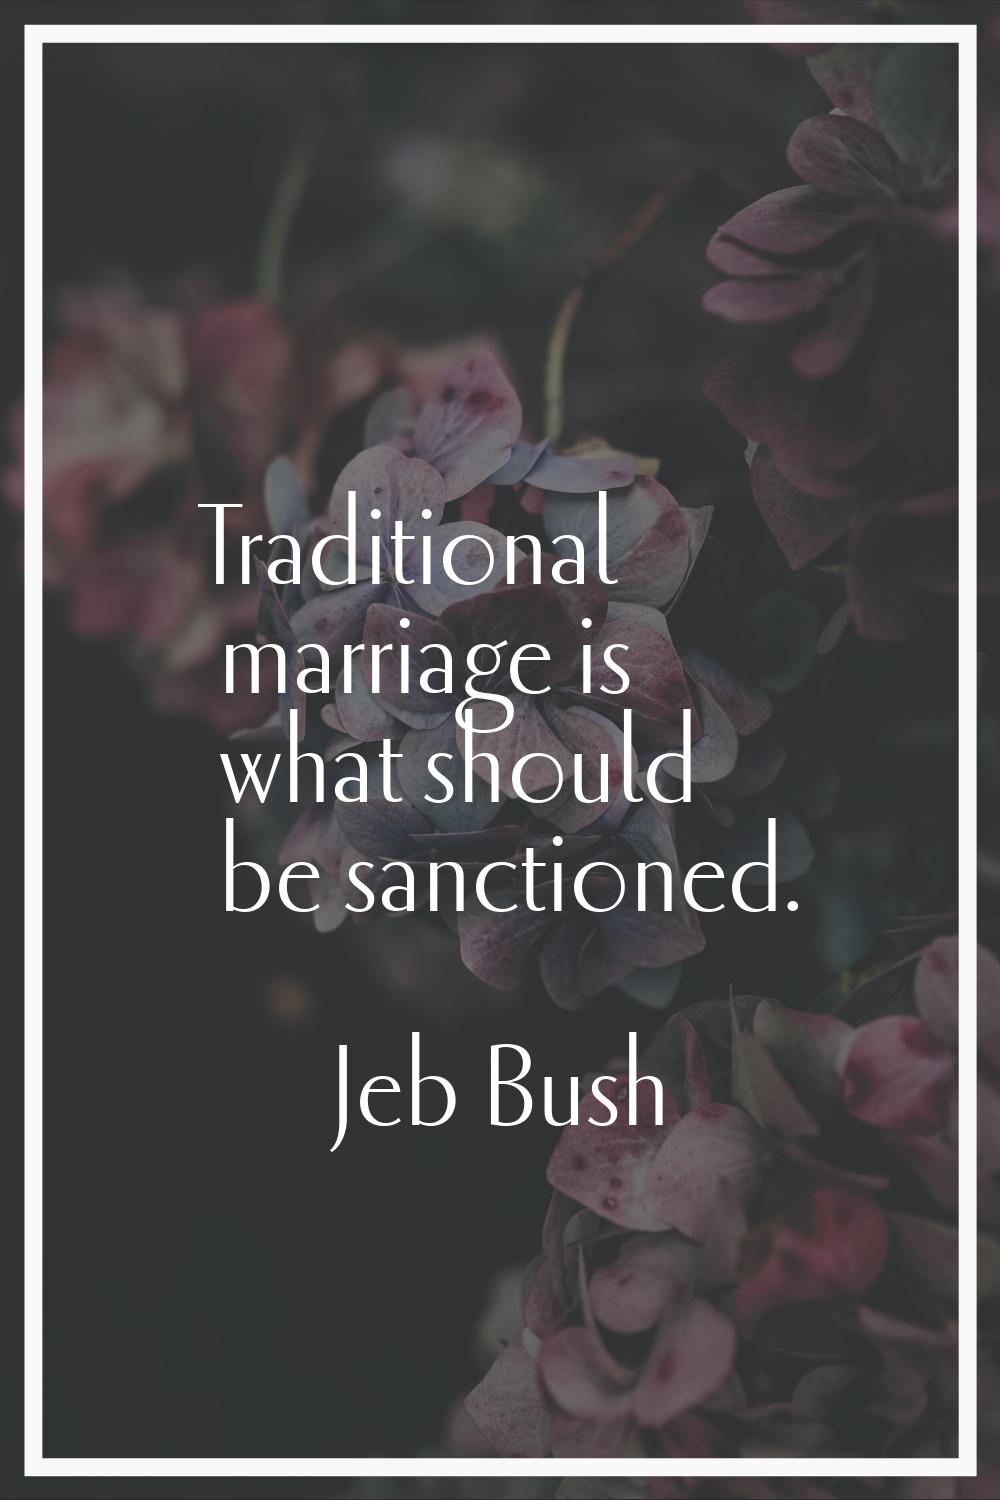 Traditional marriage is what should be sanctioned.